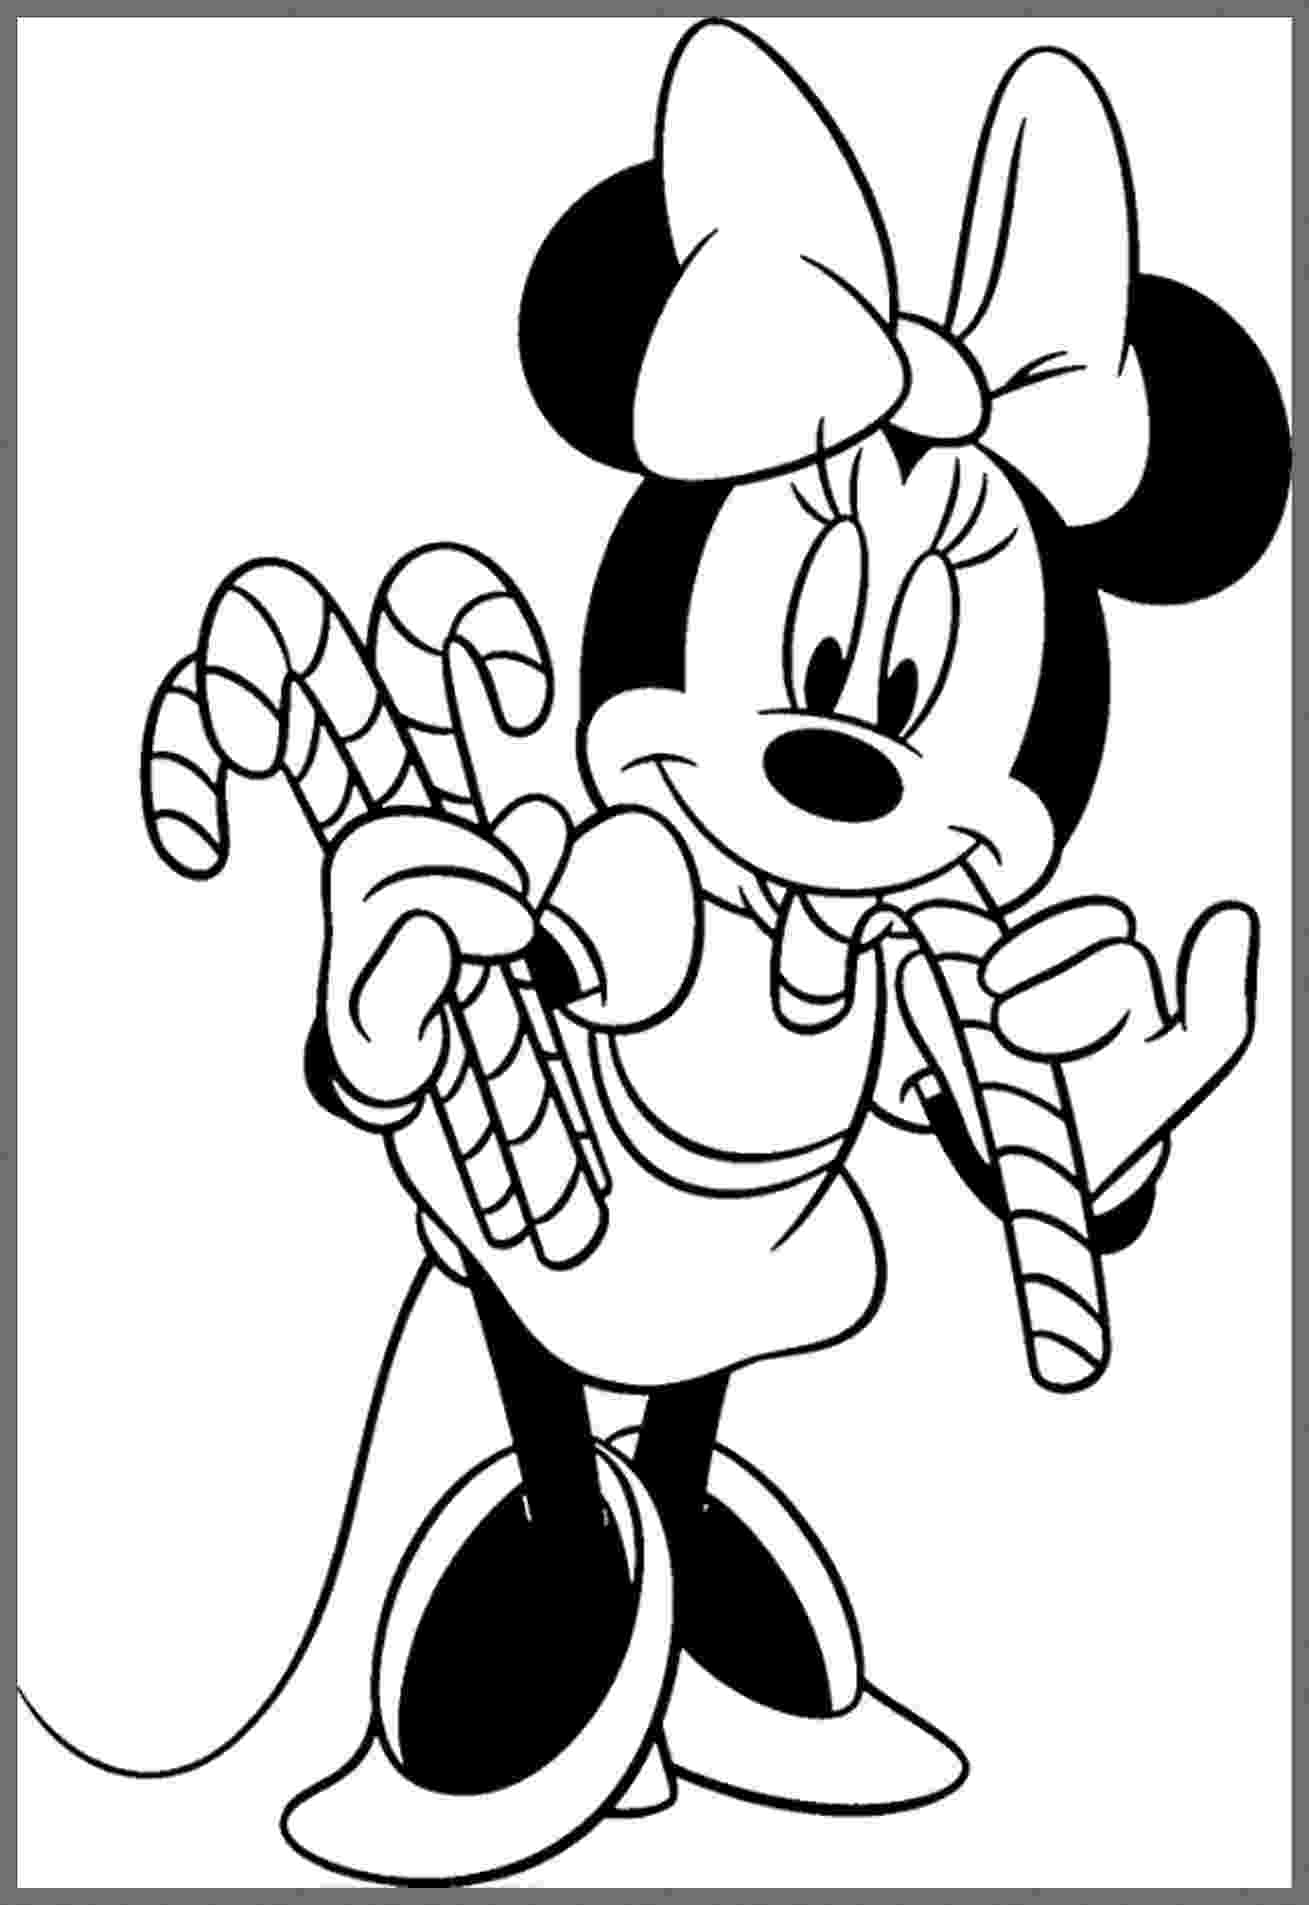 christmas couloring pages mickey mouse christmas coloring pages best coloring pages christmas couloring 